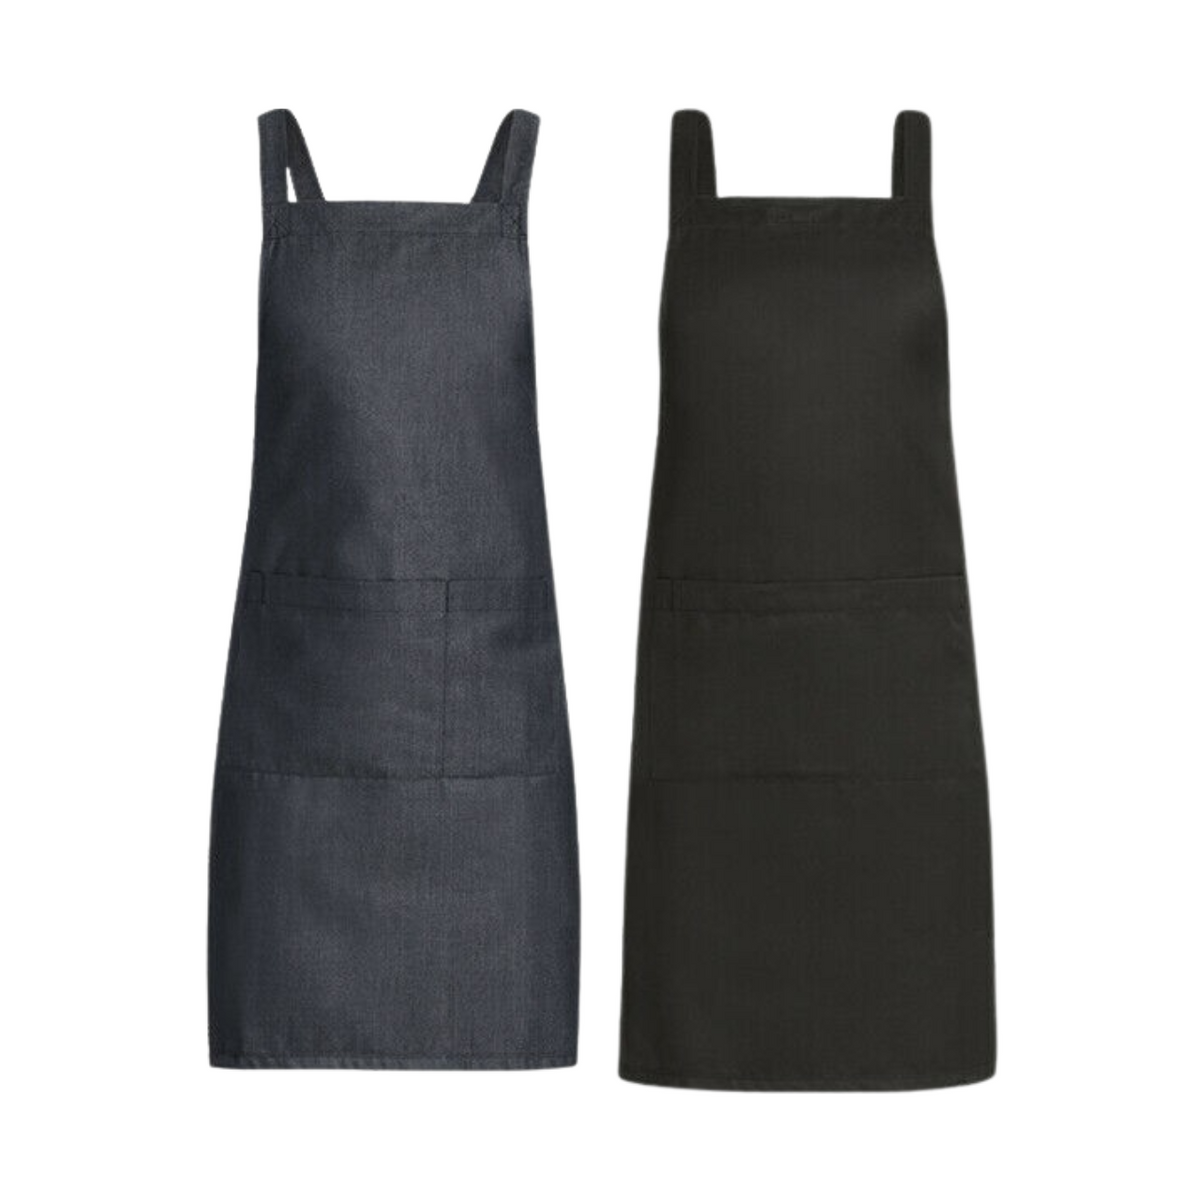 NNT Unisex Chef BIB Cross Back Apron Work Safety Durable Large Pockets CATN33-Collins Clothing Co